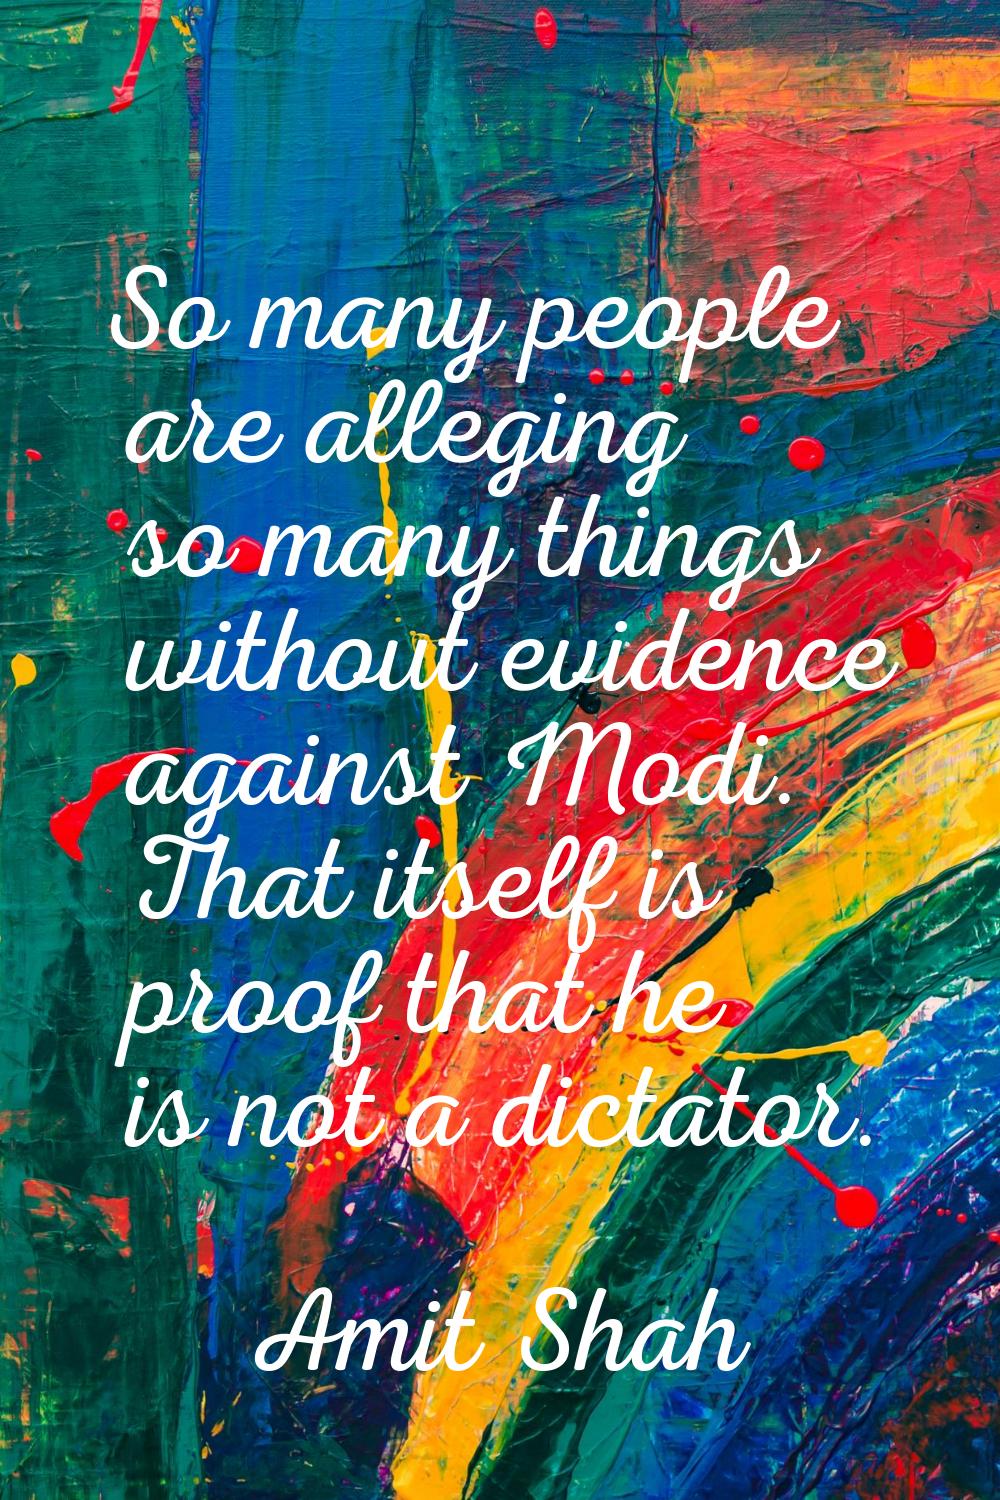 So many people are alleging so many things without evidence against Modi. That itself is proof that